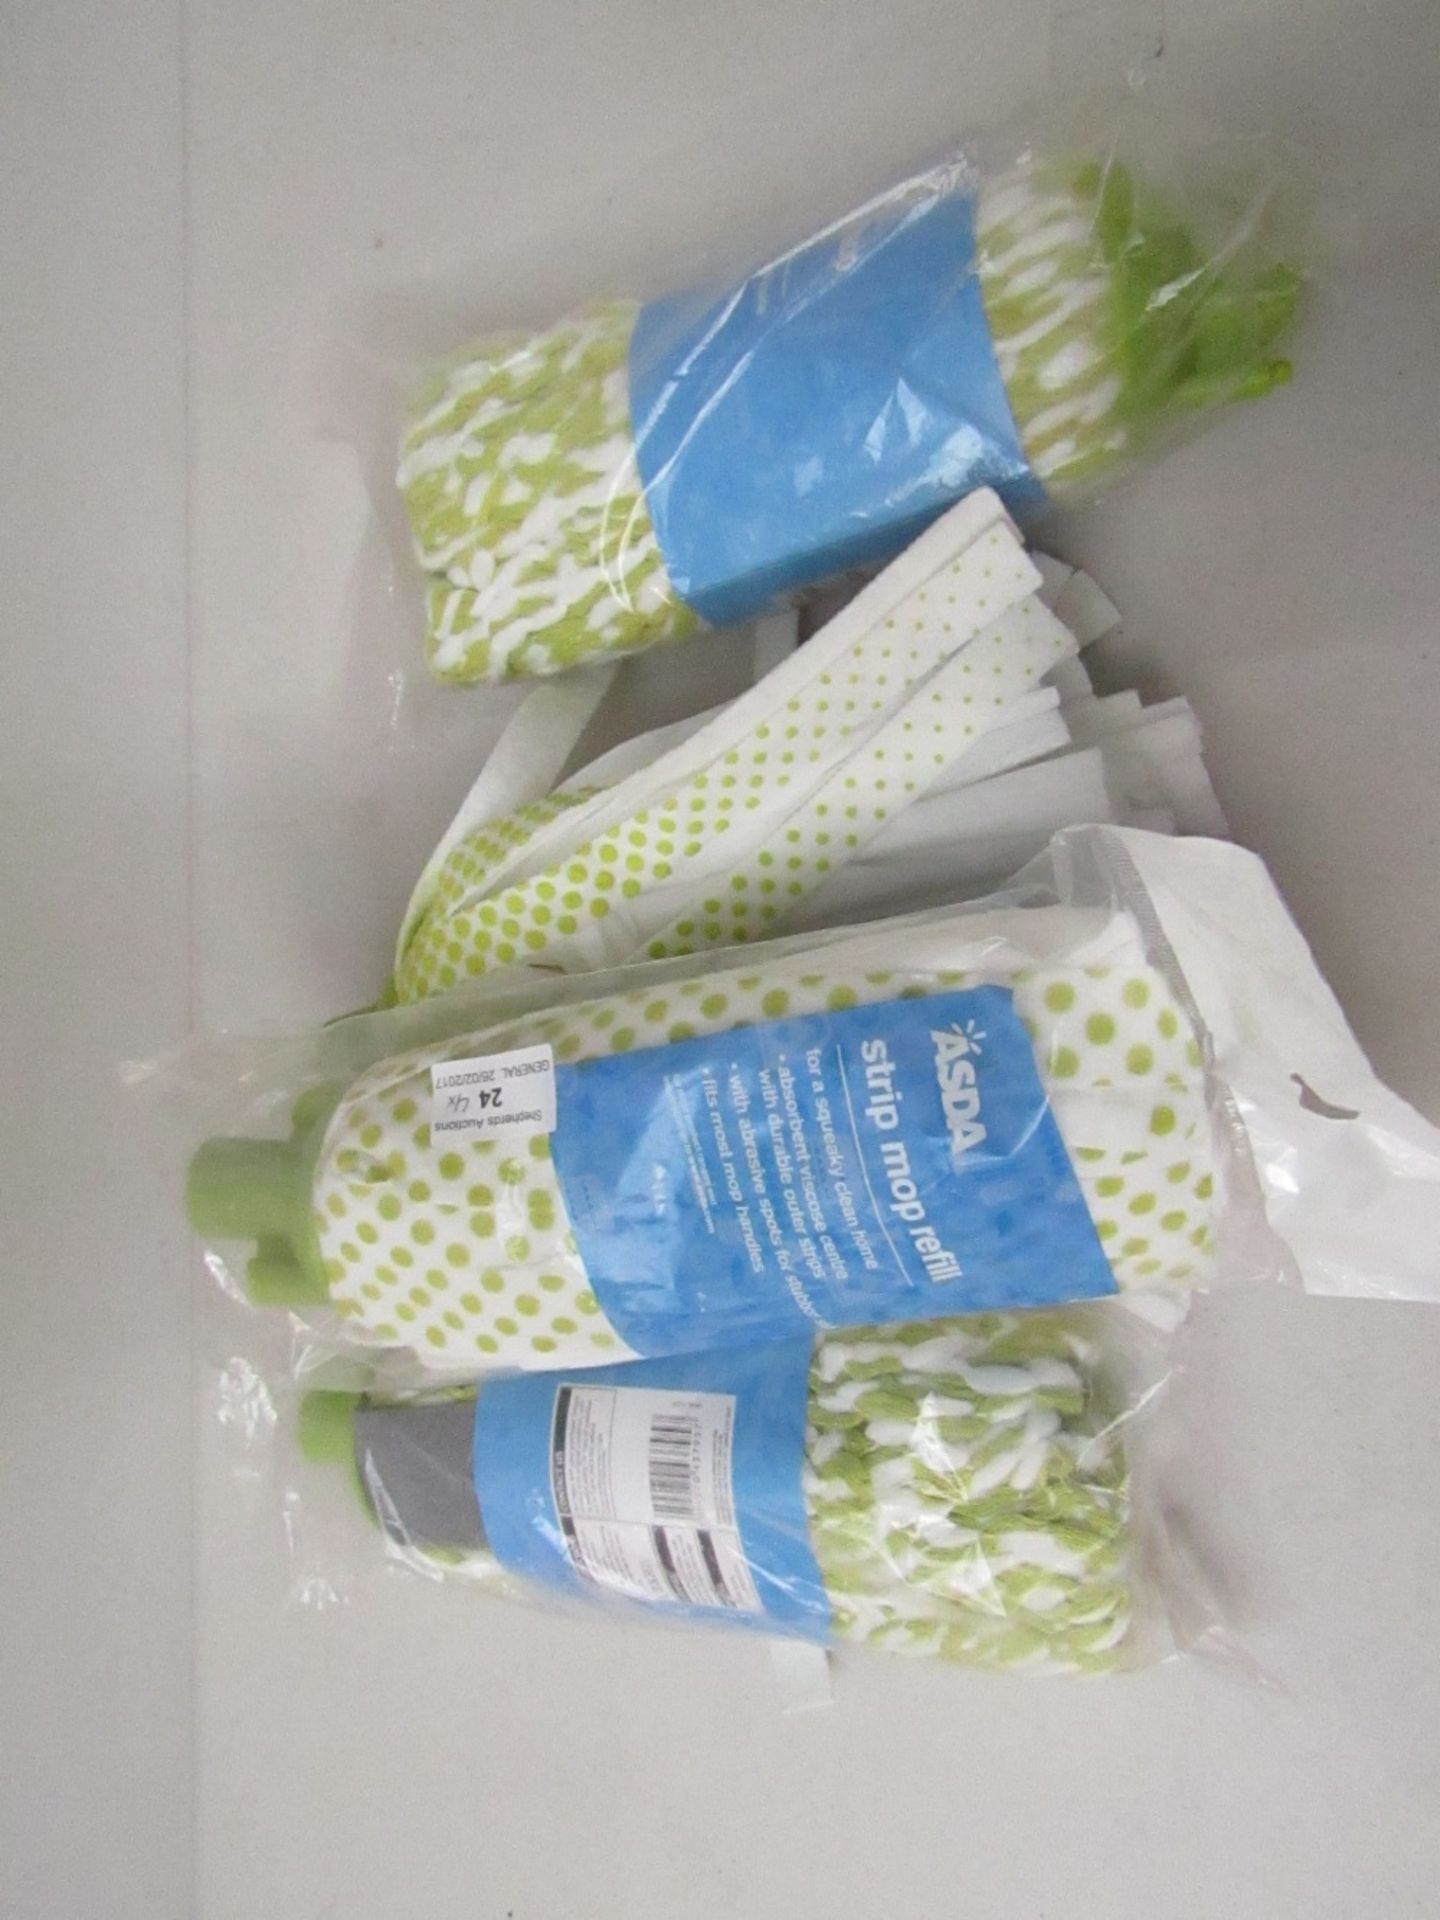 4x ASDA strip mop refills, 3x are in packaging all unchecked.